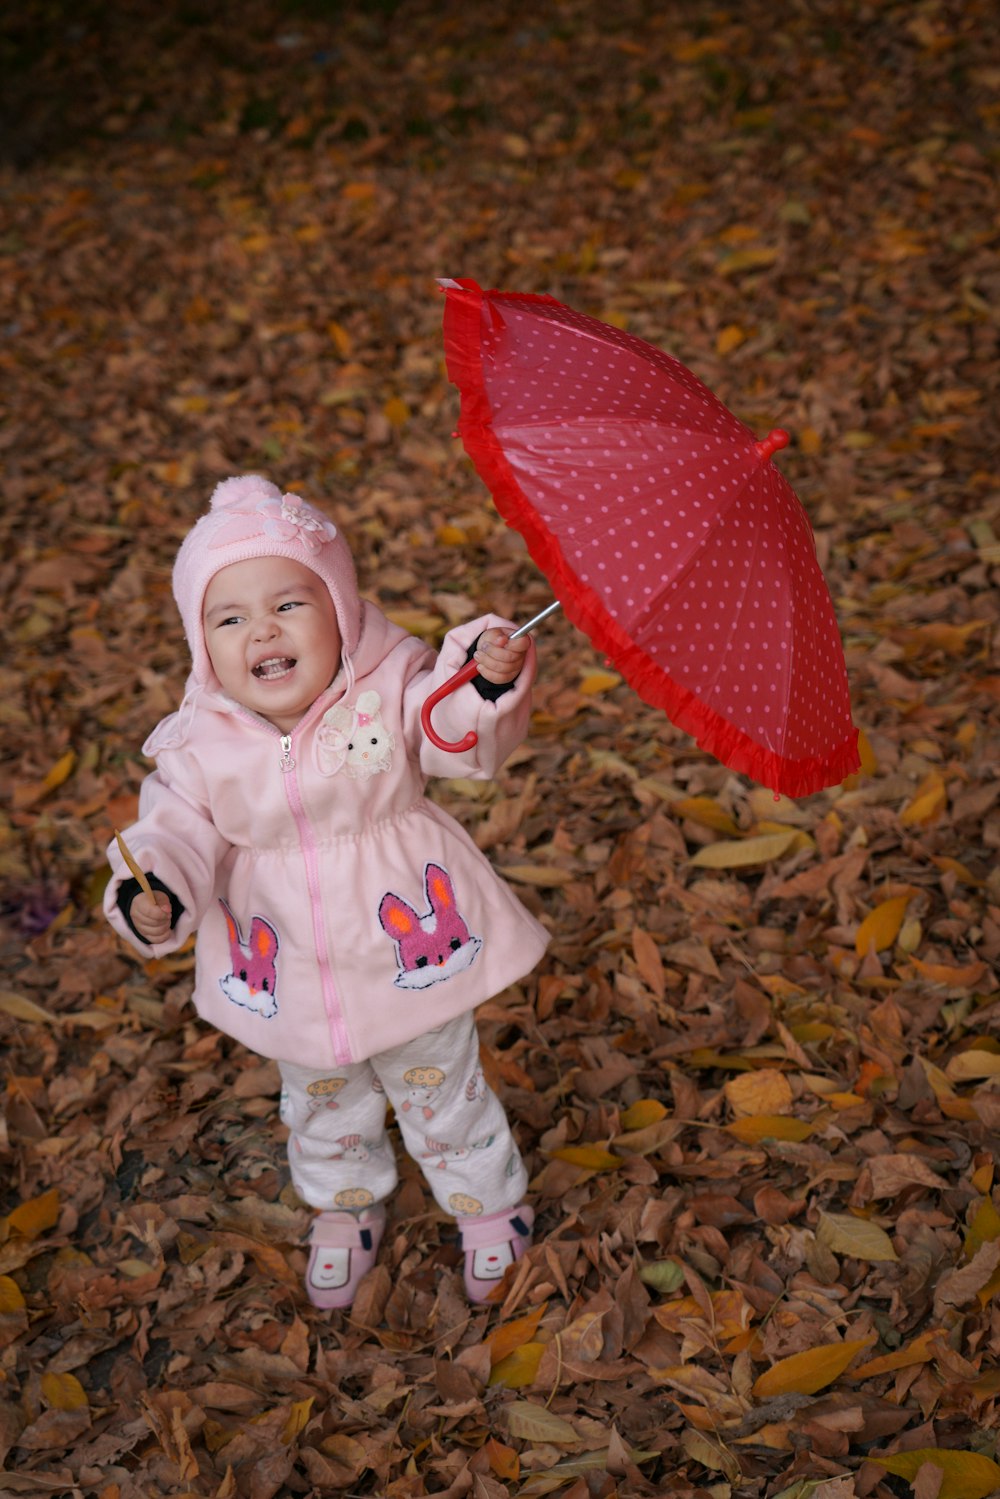 a little girl in a pink coat holding a red umbrella